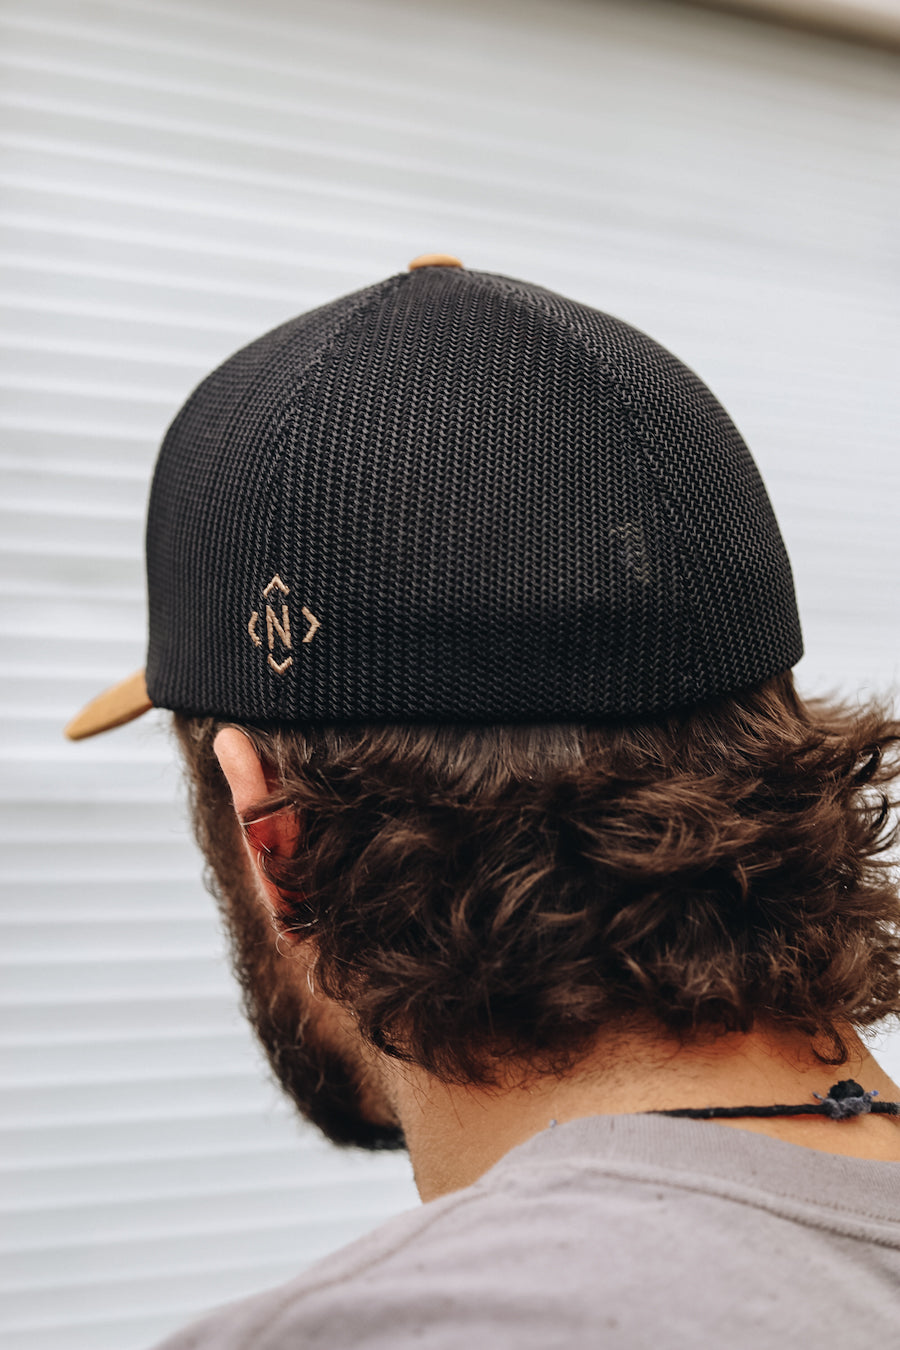 NASH Patch Fitted Trucker [Sahara]